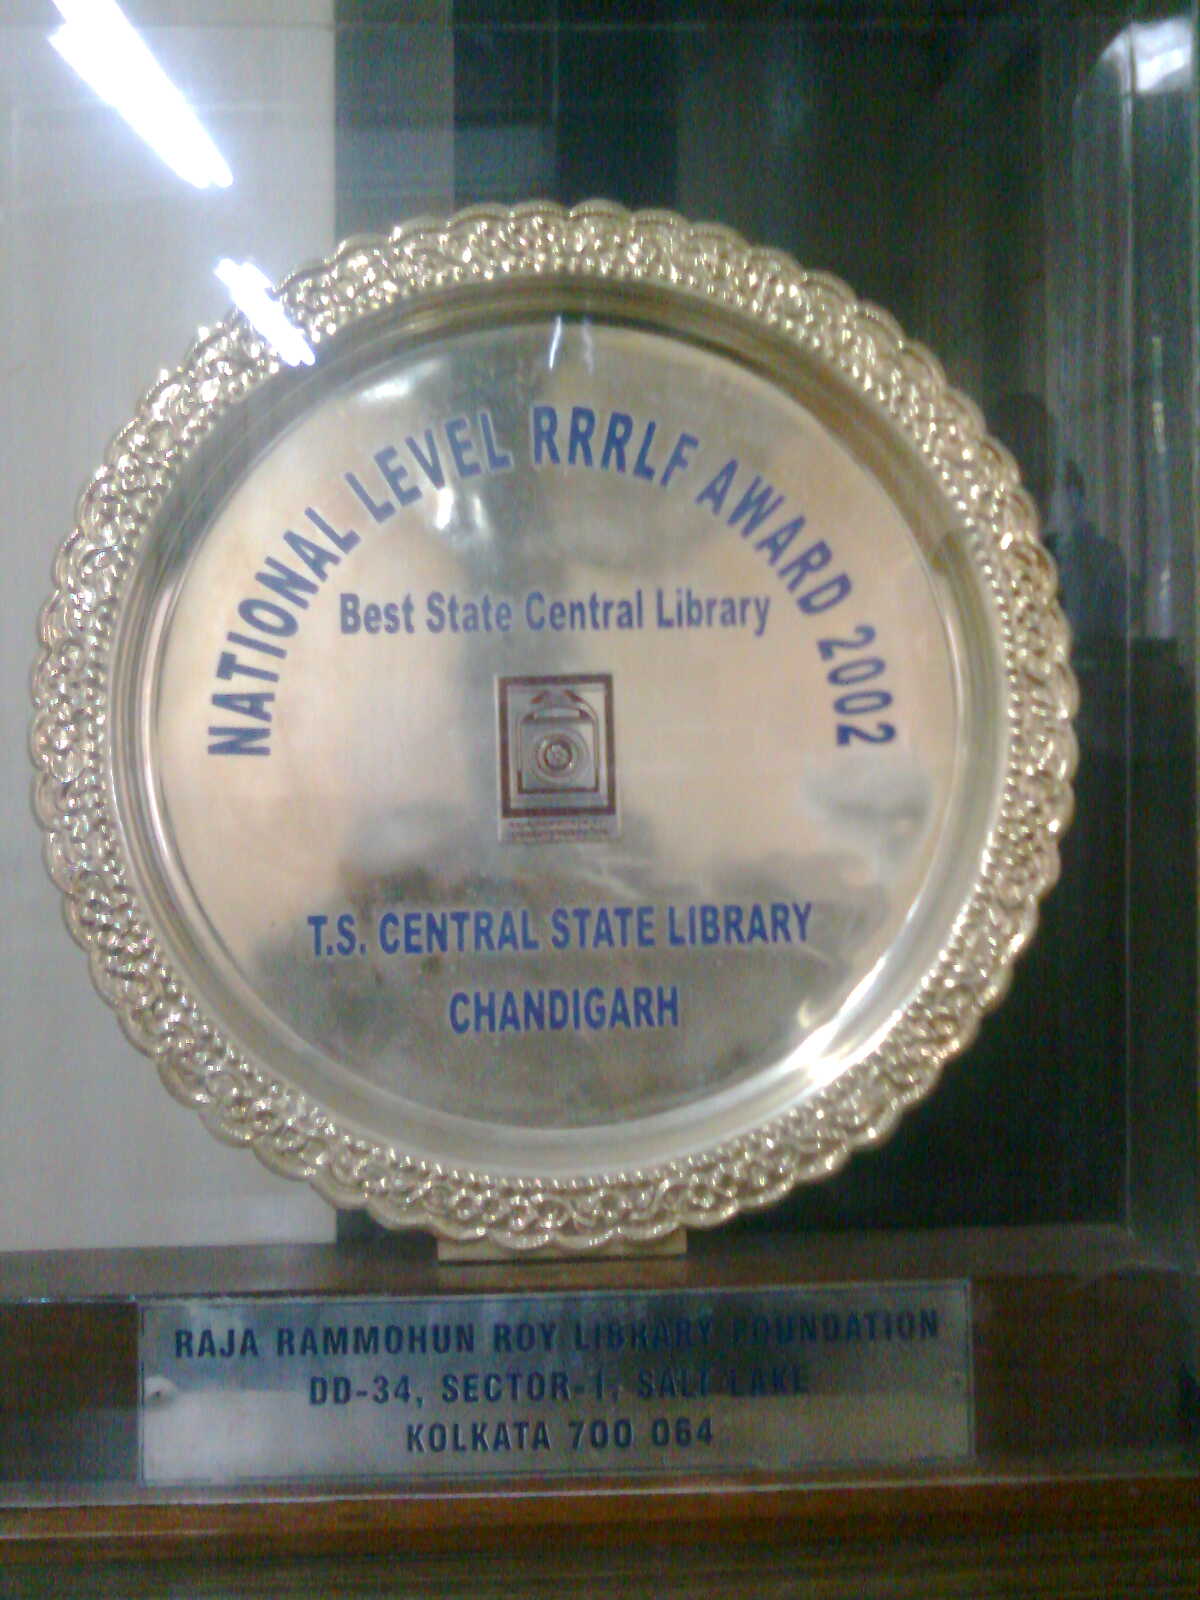 Best State Central Library Trophy, Central State Library, Bhiwani